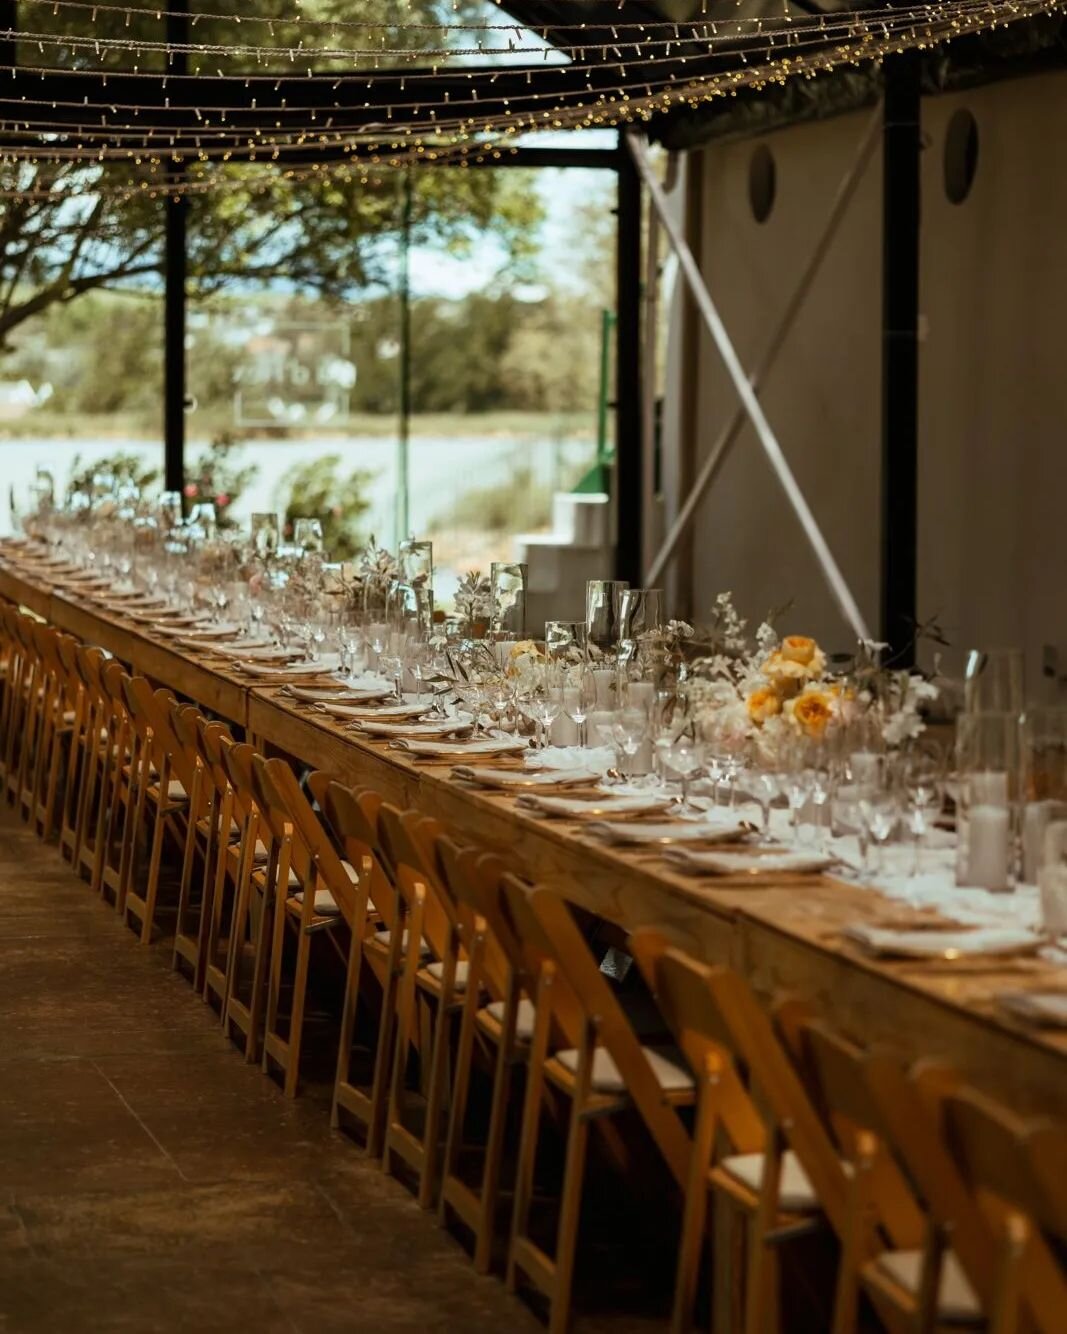 Long table feast for the reception! 

It's the perfect way for everyone to mix and mingle, enjoying the moment while celebrating the newlyweds @candibod
@mrlukewright

Eat, chat, and soak in all the wedding details! 🍽️ 

Venue @audehexestate
Dress @